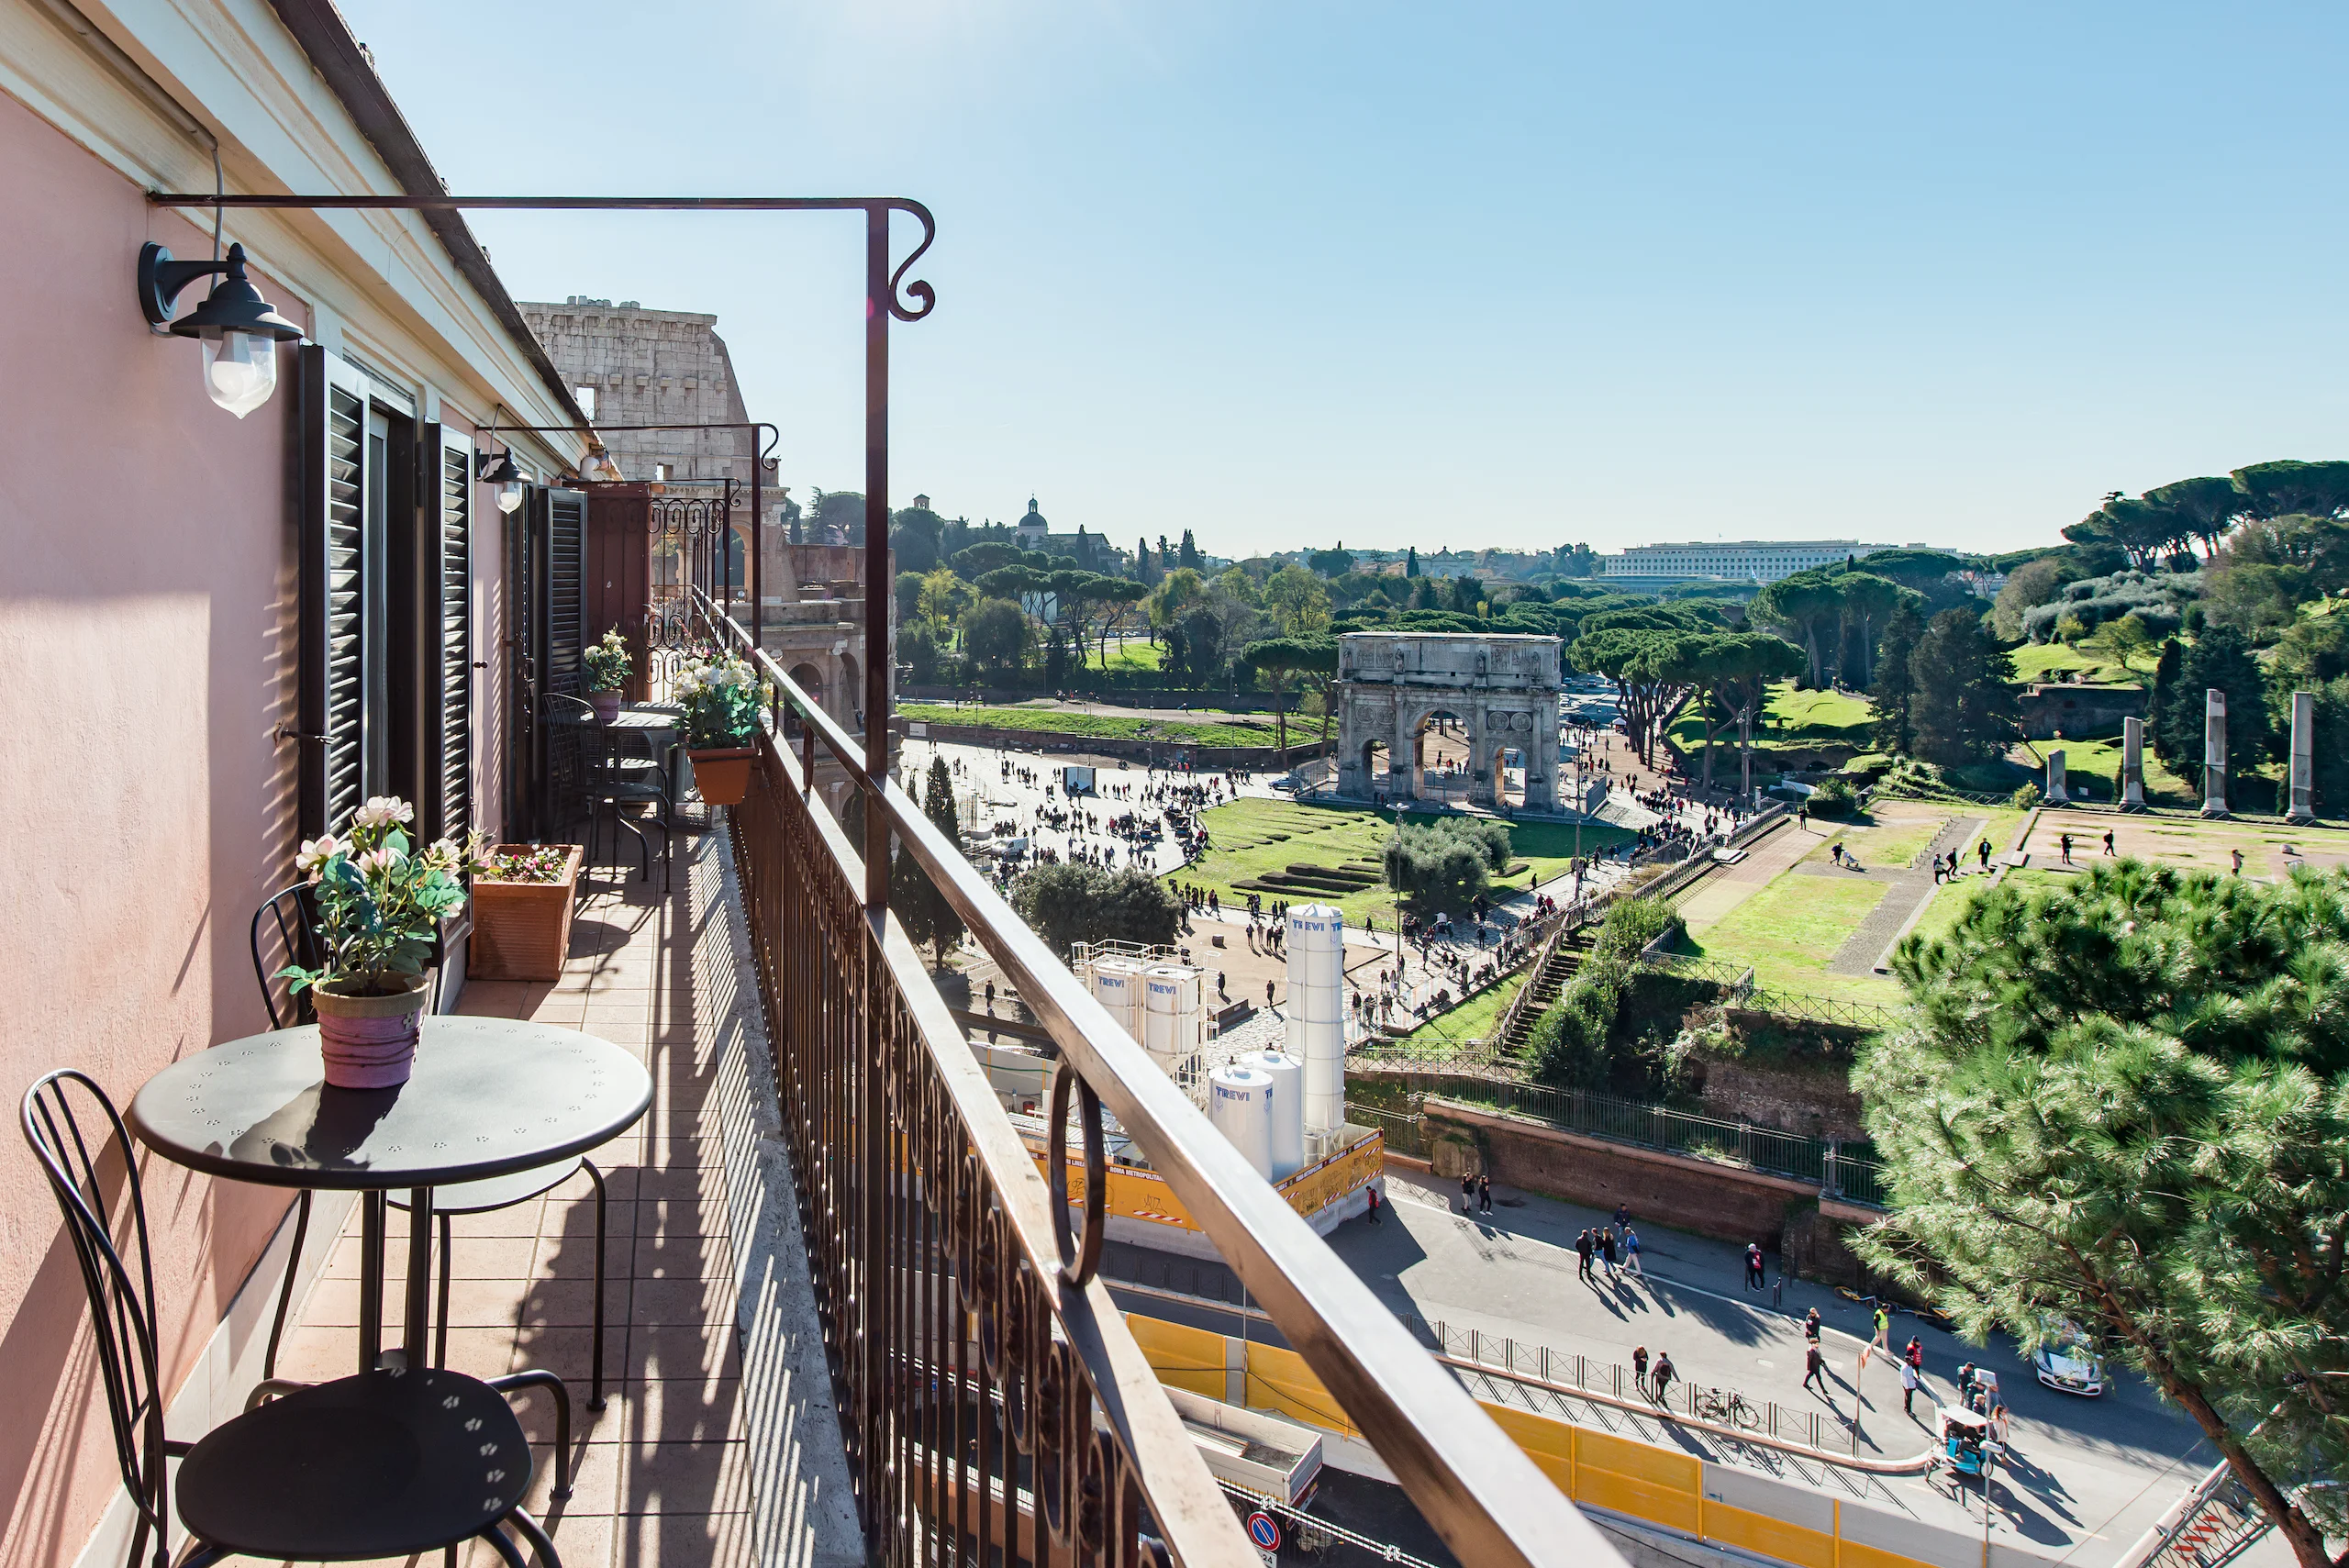 Hotels Near the Colosseum in Rome - Vista Antica - View of Roman Forum and Colosseum